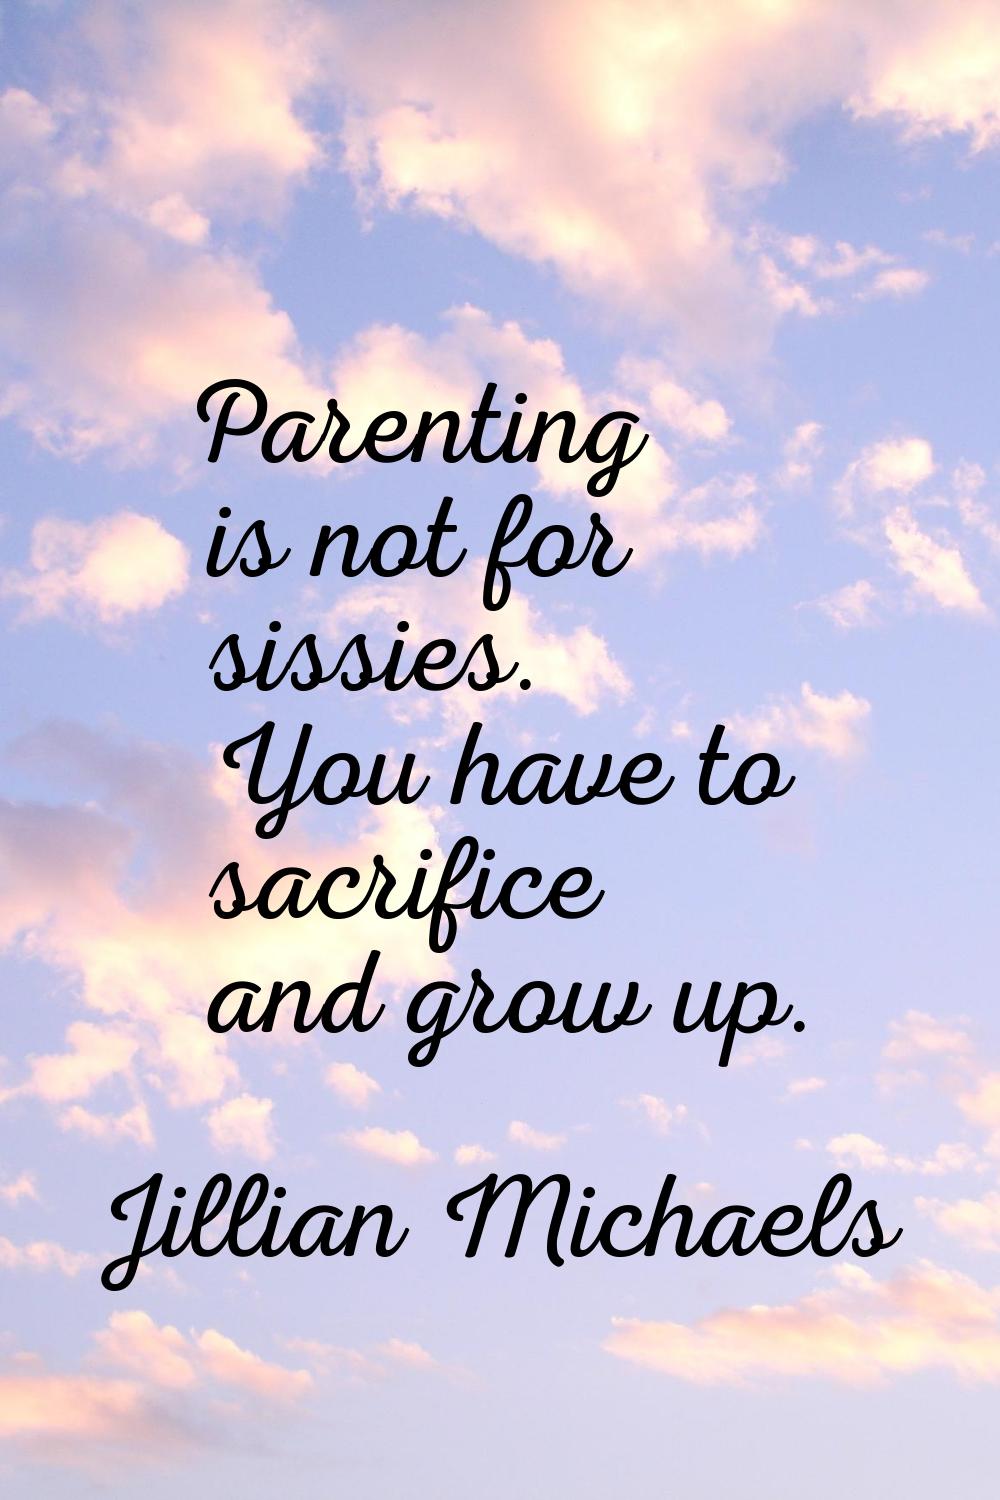 Parenting is not for sissies. You have to sacrifice and grow up.